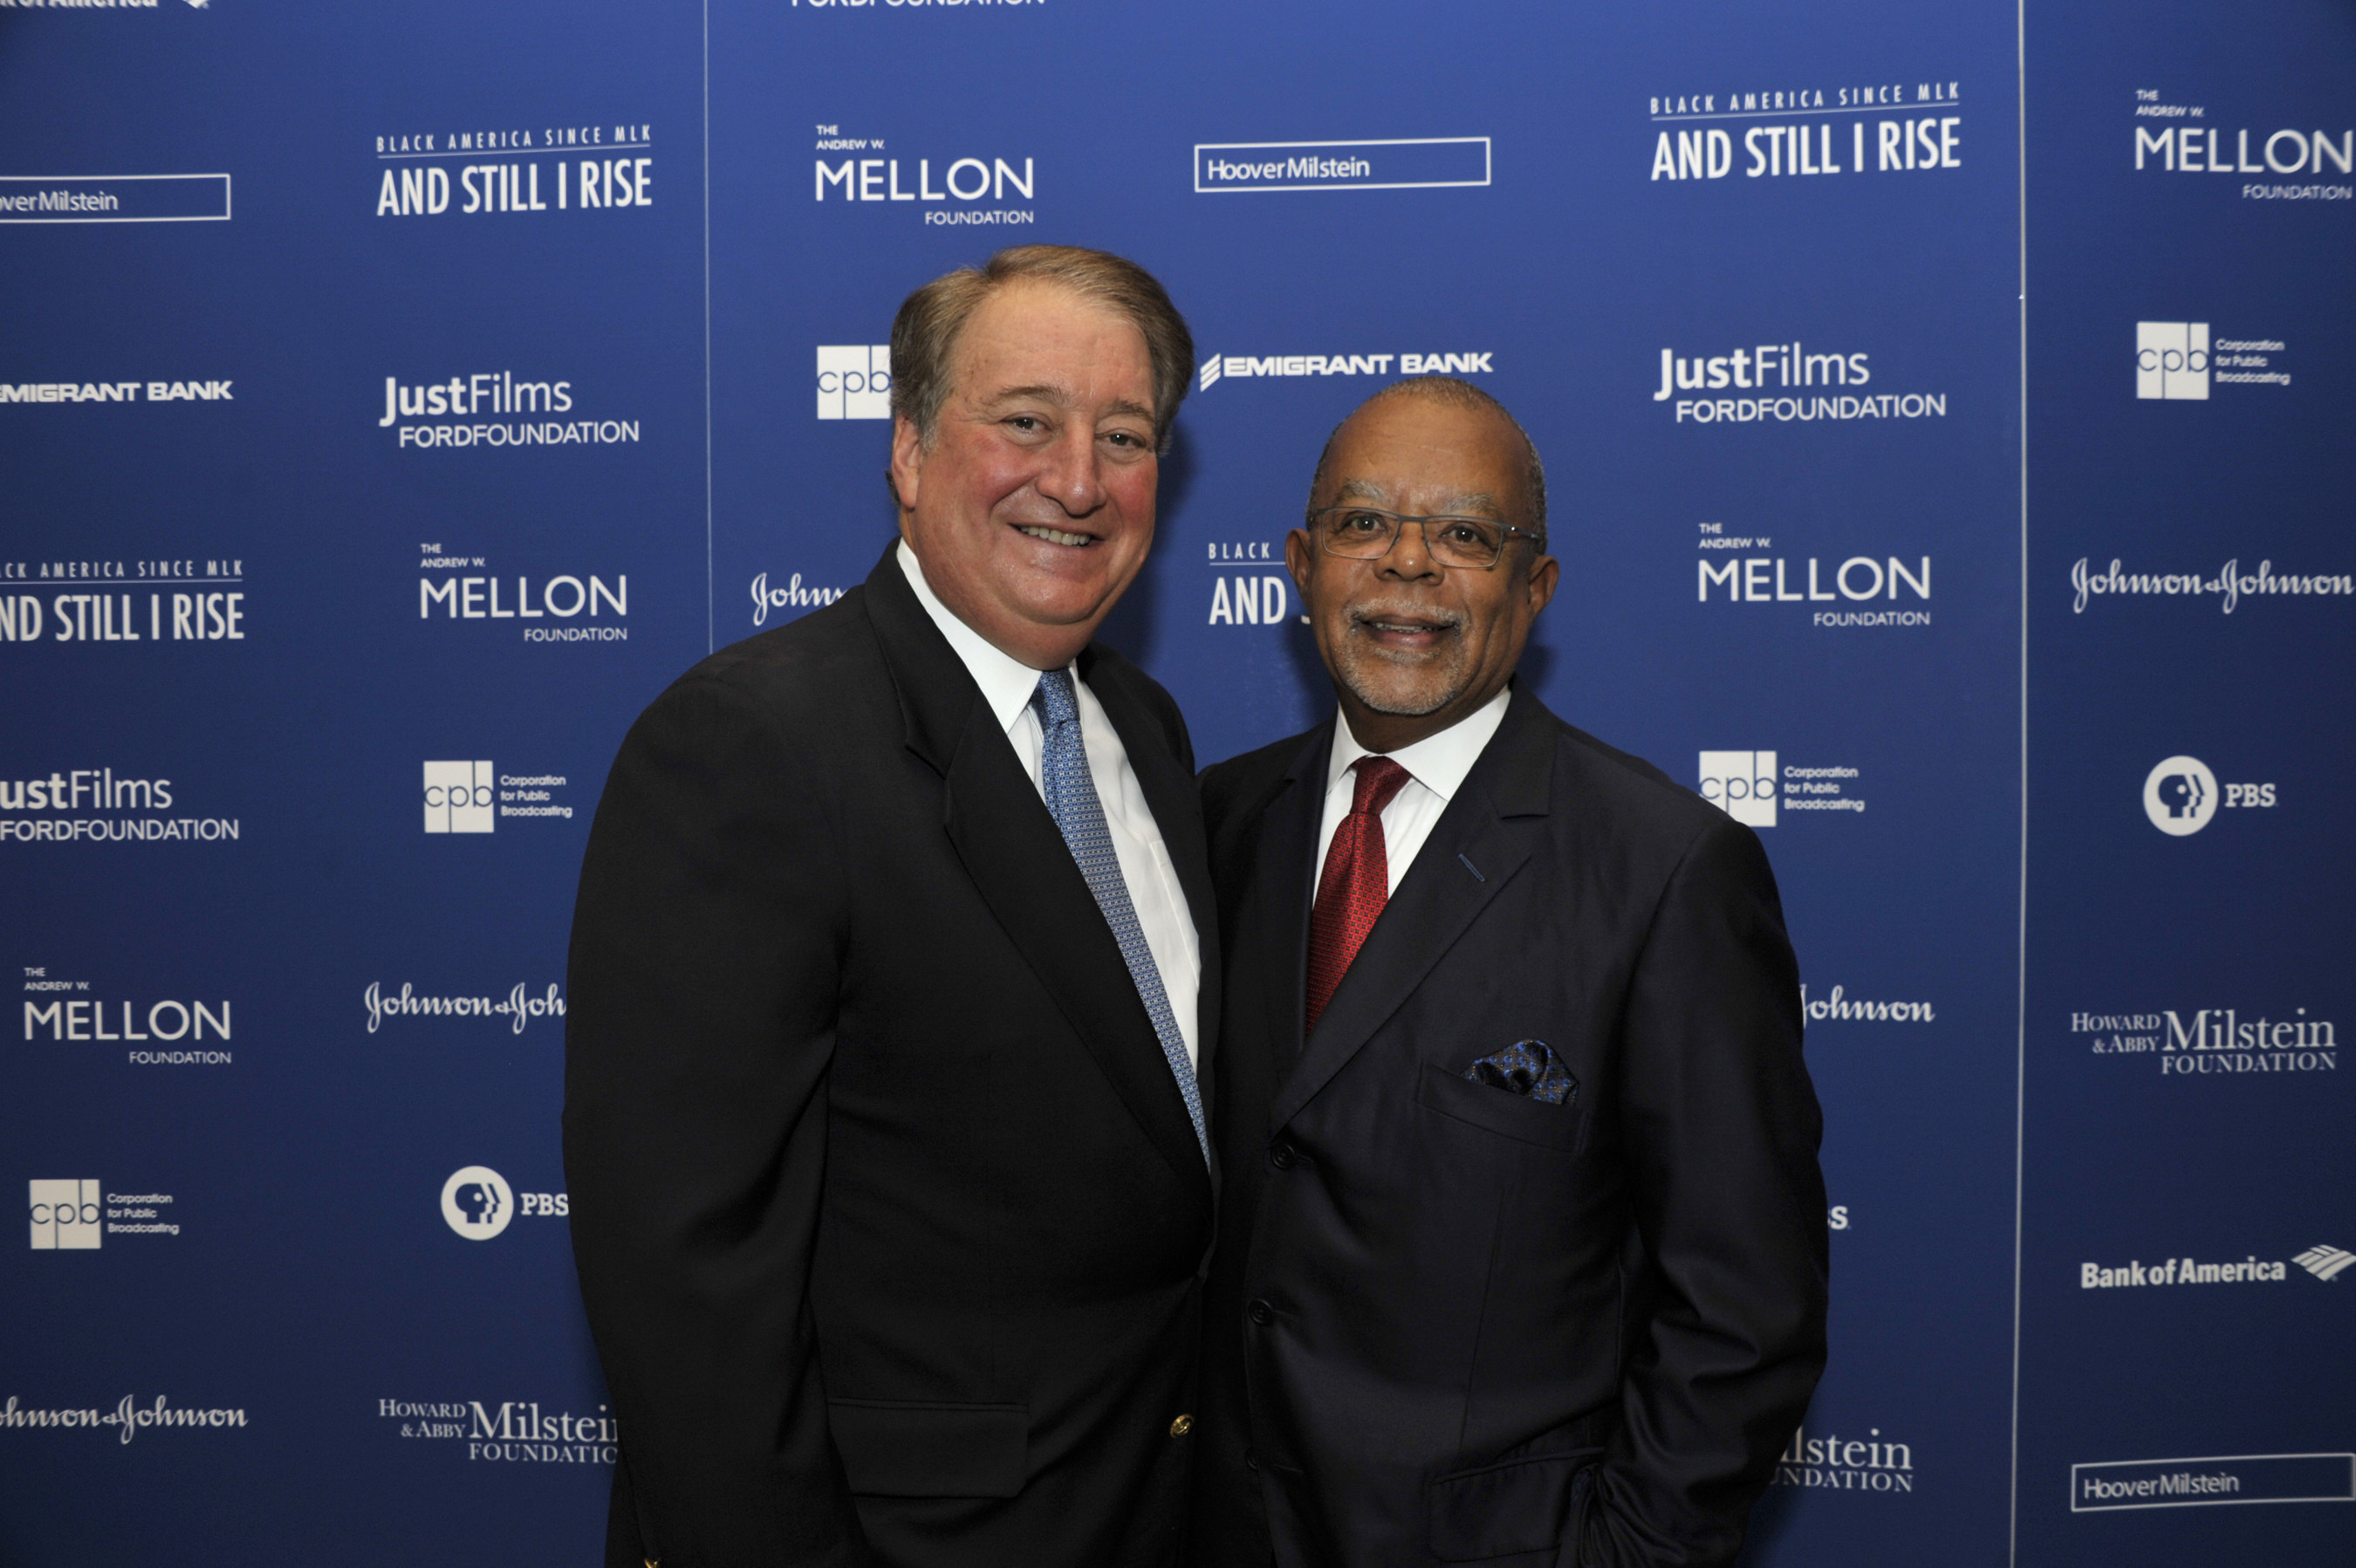 Howard P. Milstein, Chairman and CEO of Emigrant Bank (left), with Henry Louis Gates Jr., at a launch event sponsored by the Howard and Abby Milstein Foundation, Emigrant Bank and HooverMilstein, for Professor Gates upcoming public television series "Black America Since MLK: And Still I Rise."